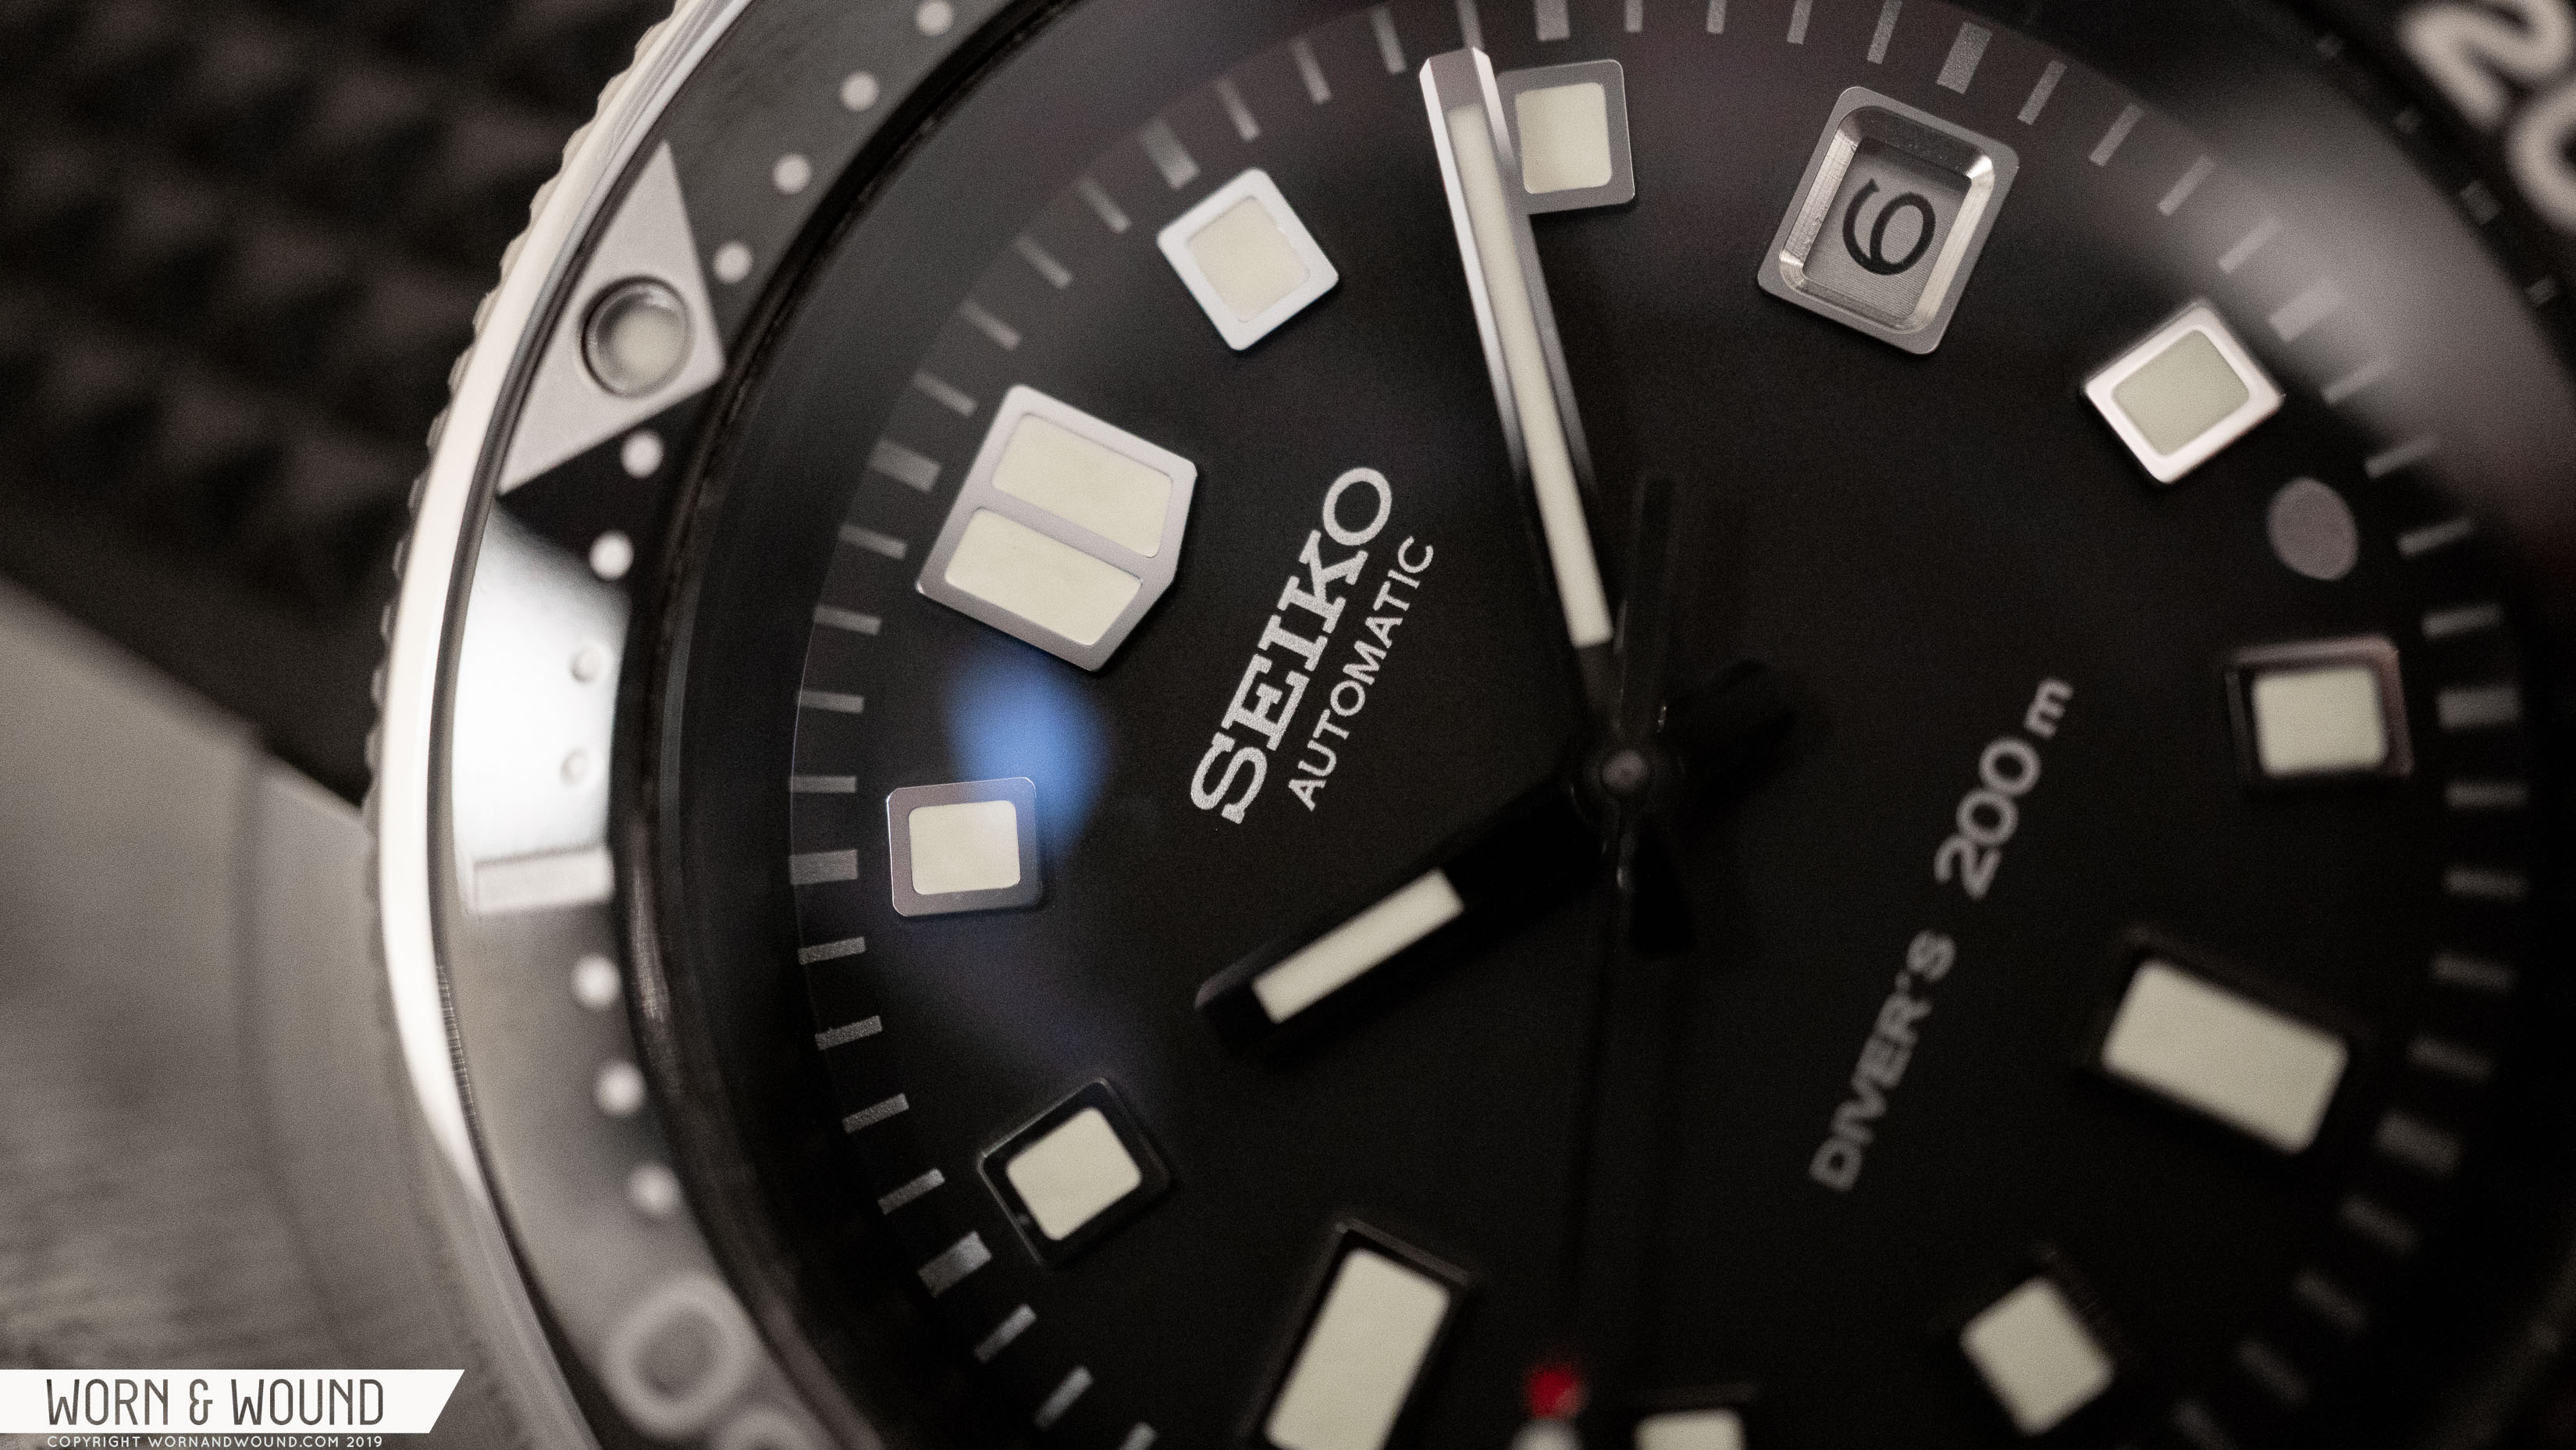 Baselworld 2019: Gallery of the Seiko Ref. SLA033, the Reissue of the  Iconic 6105 Diver - Worn & Wound